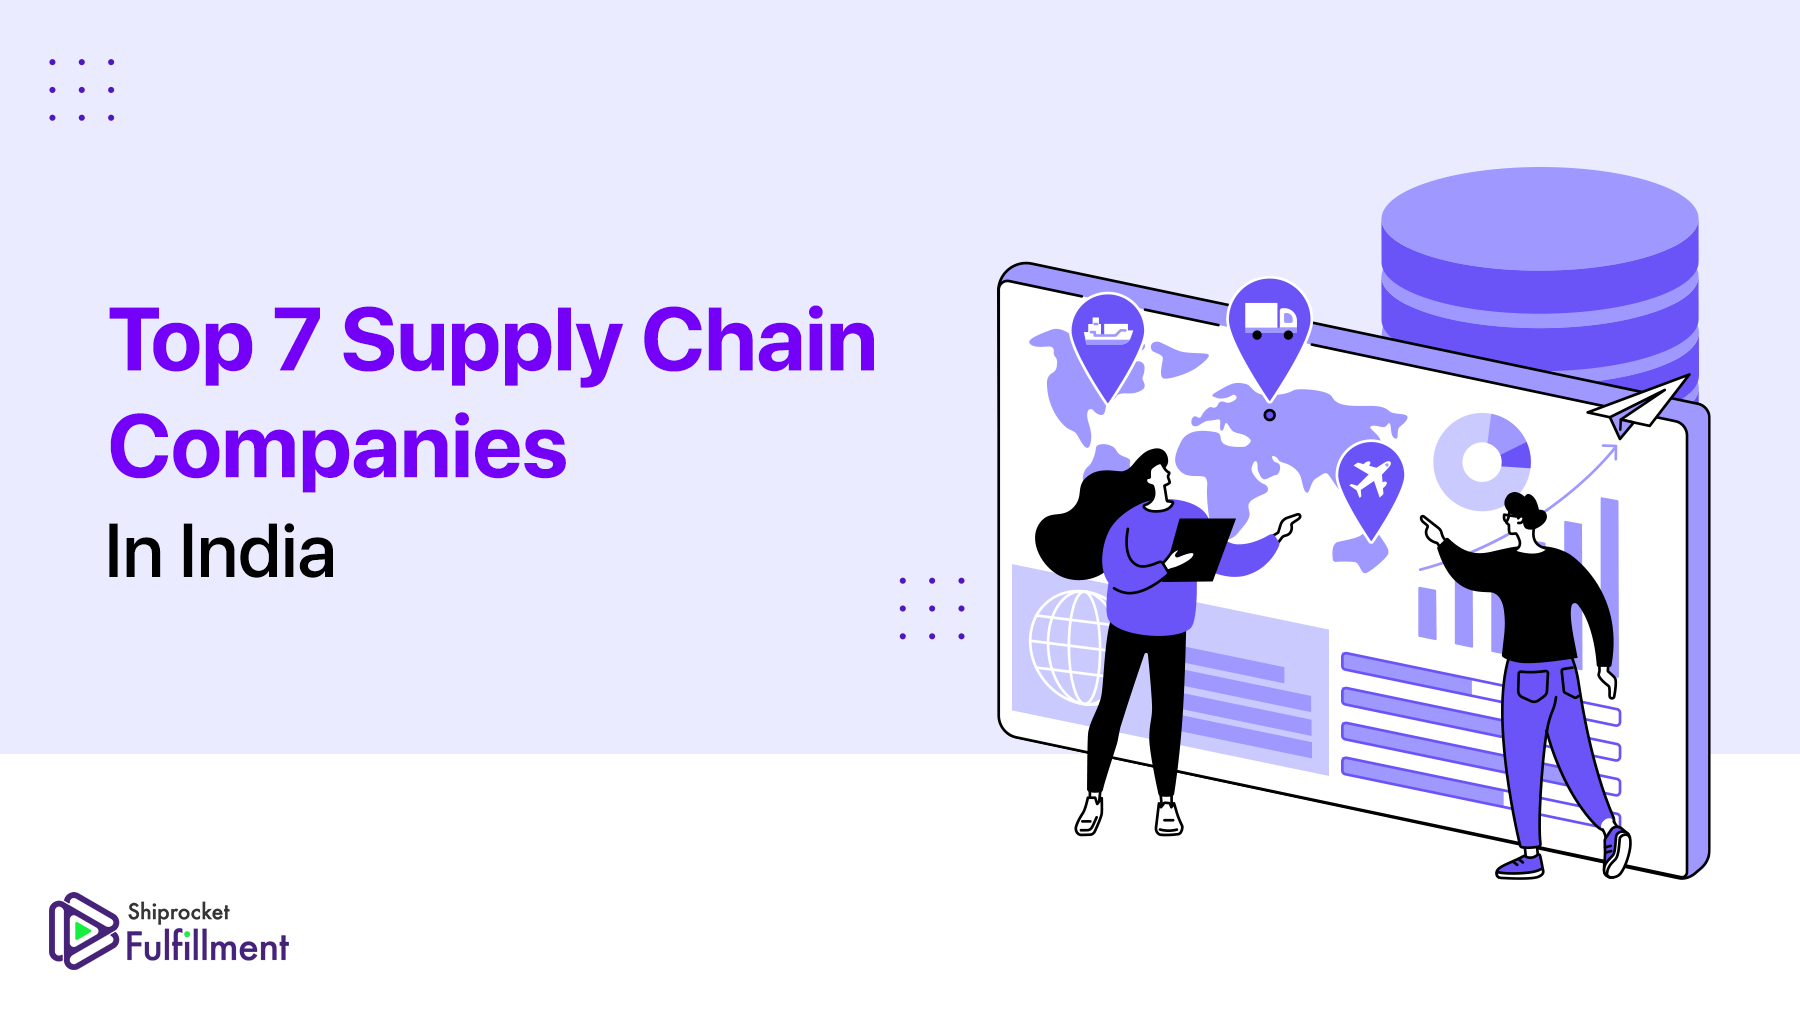 Top 10 Supply Chain Companies in India